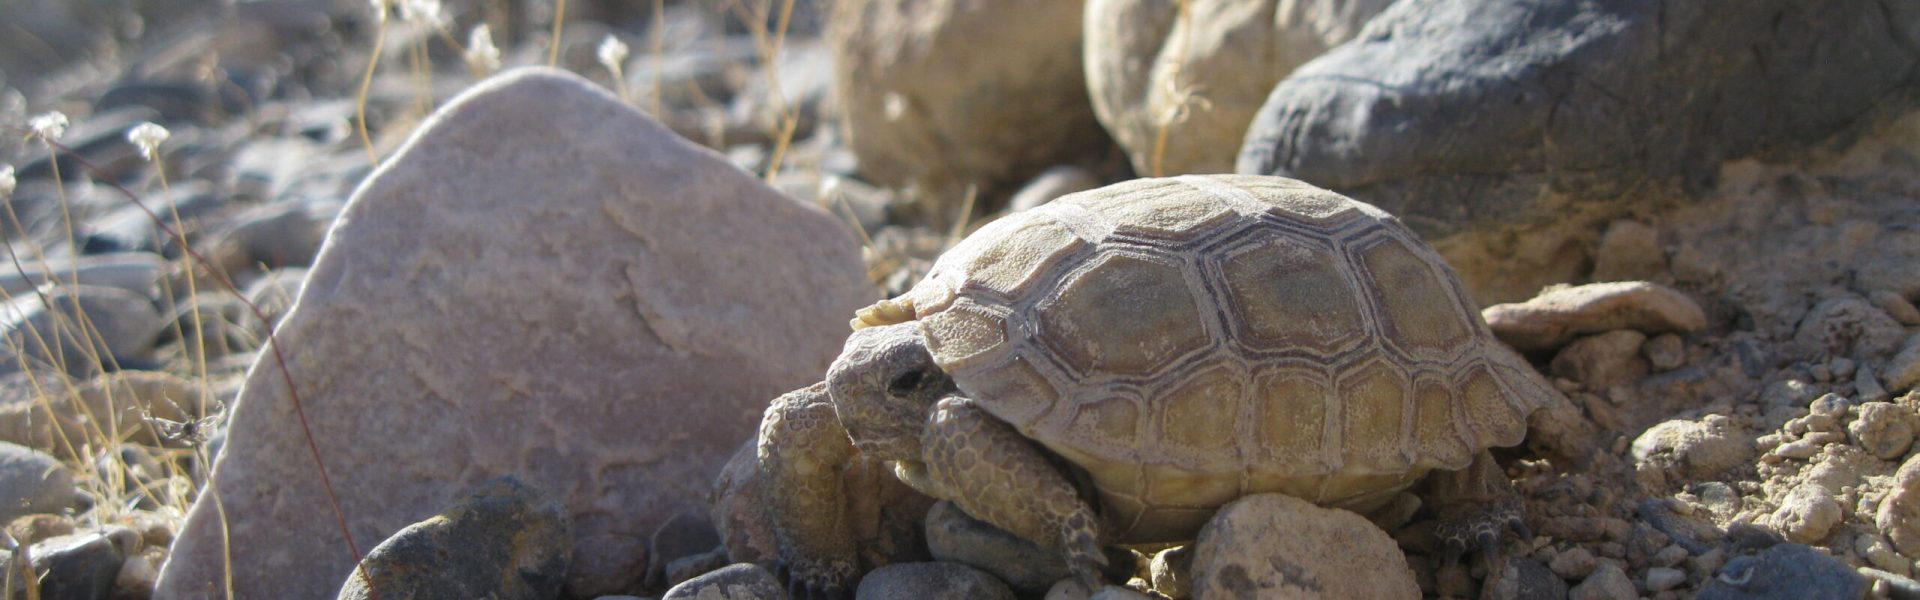 A young endangered Mojave desert tortoise sitting in the sun